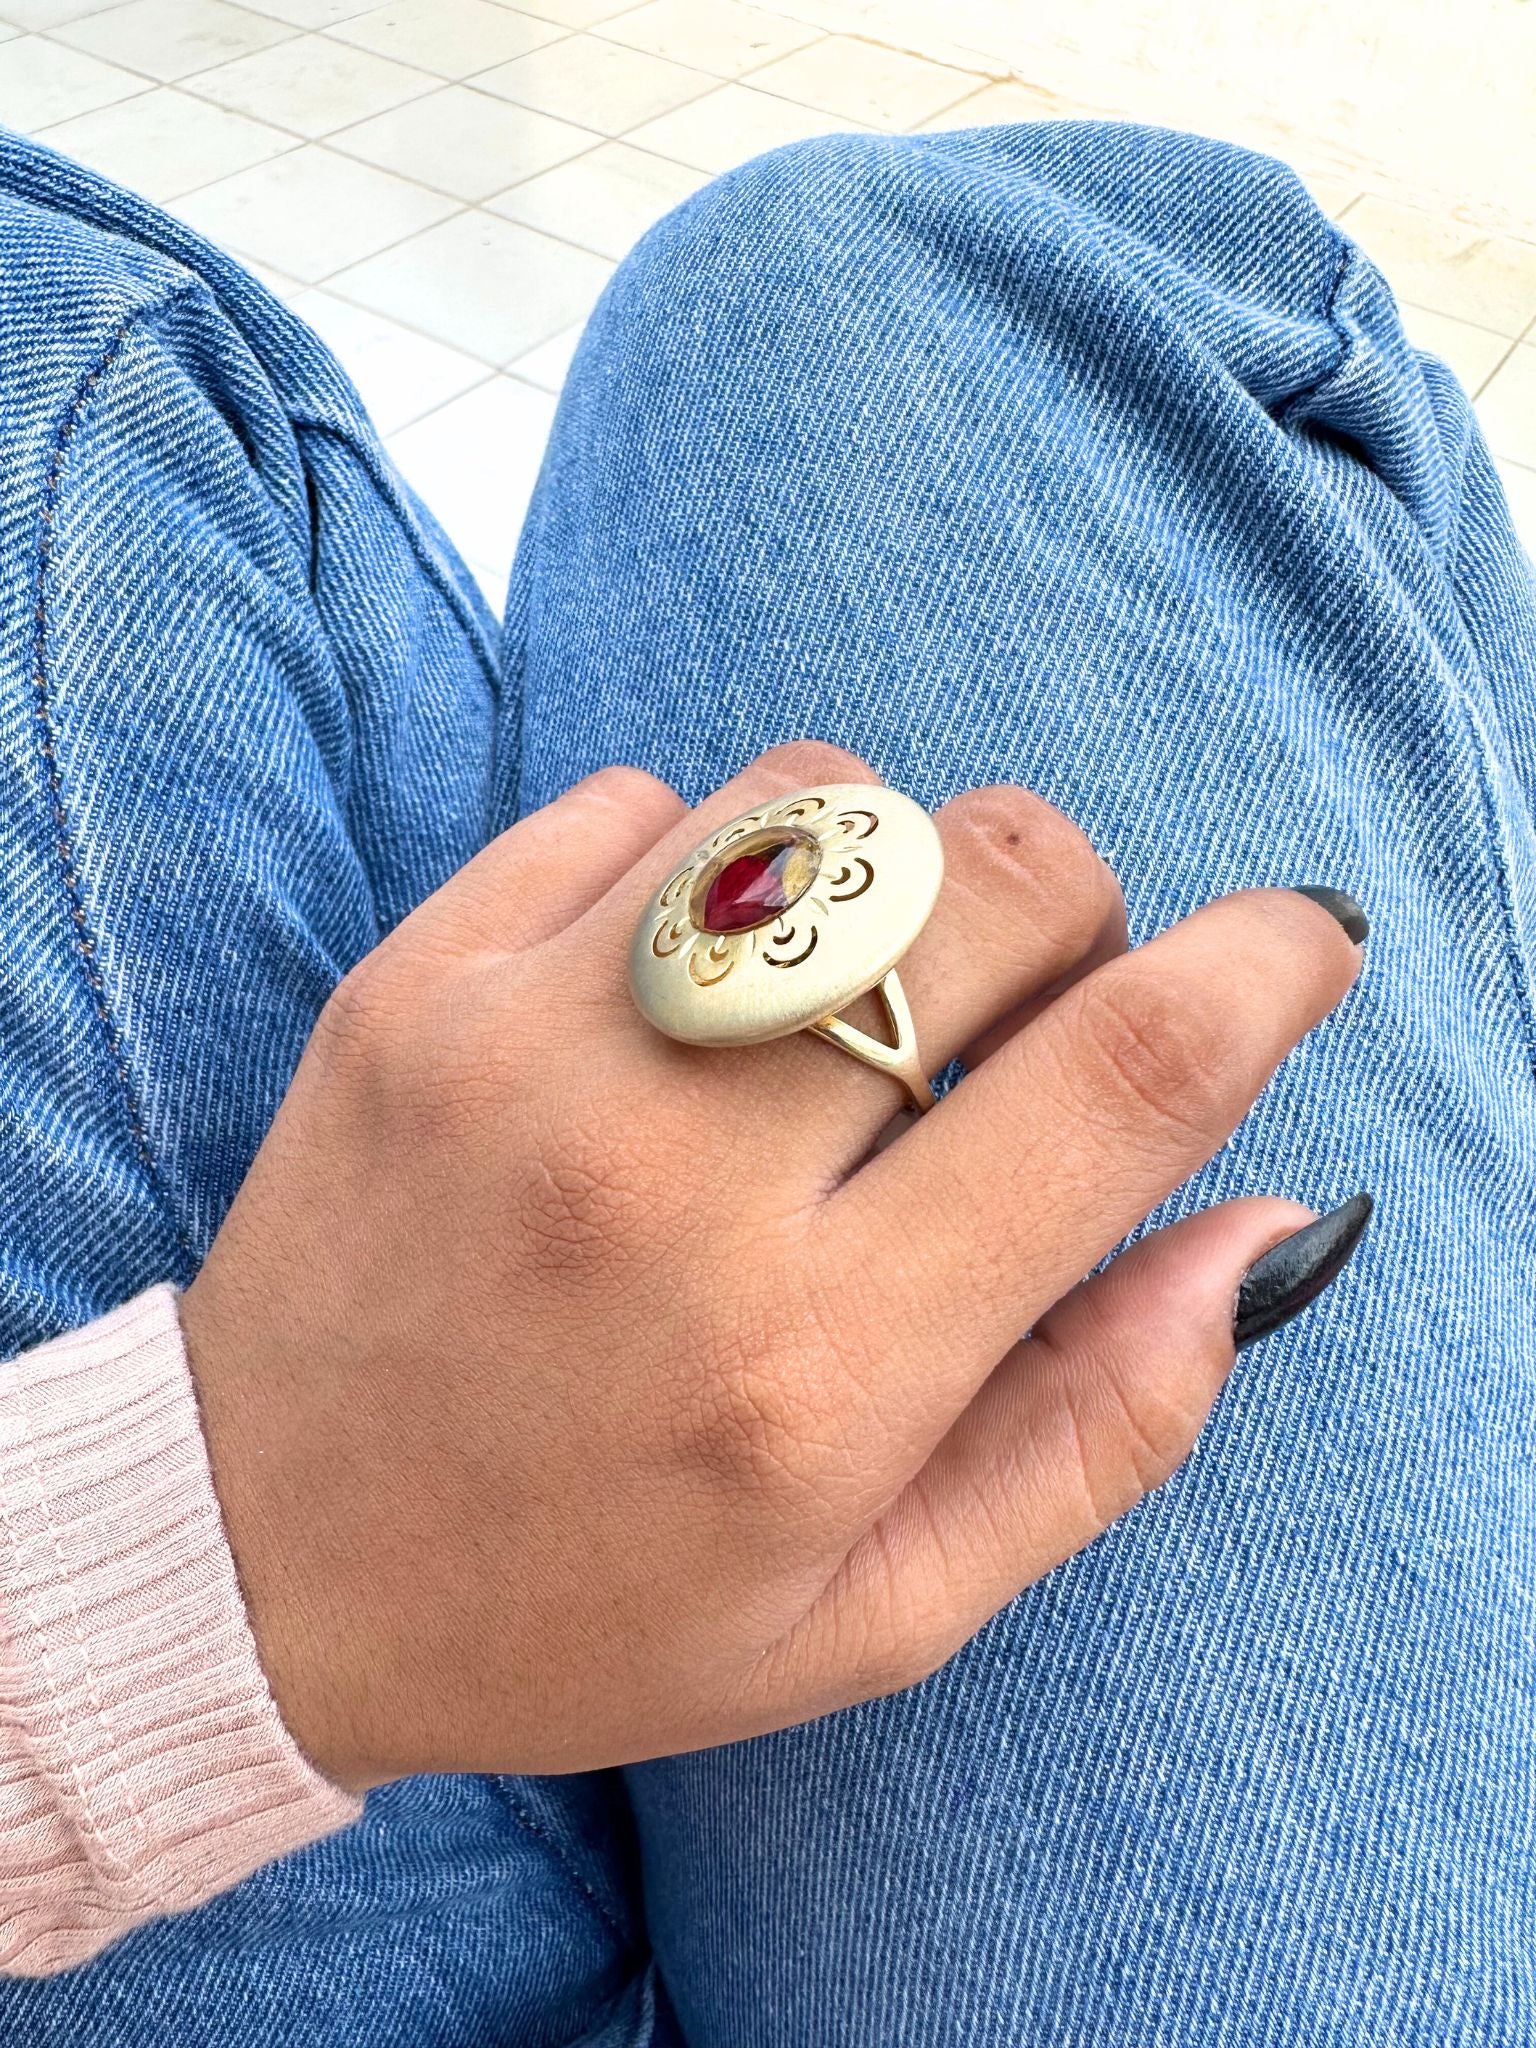 Nature Red Rose Flower Romantic Ring